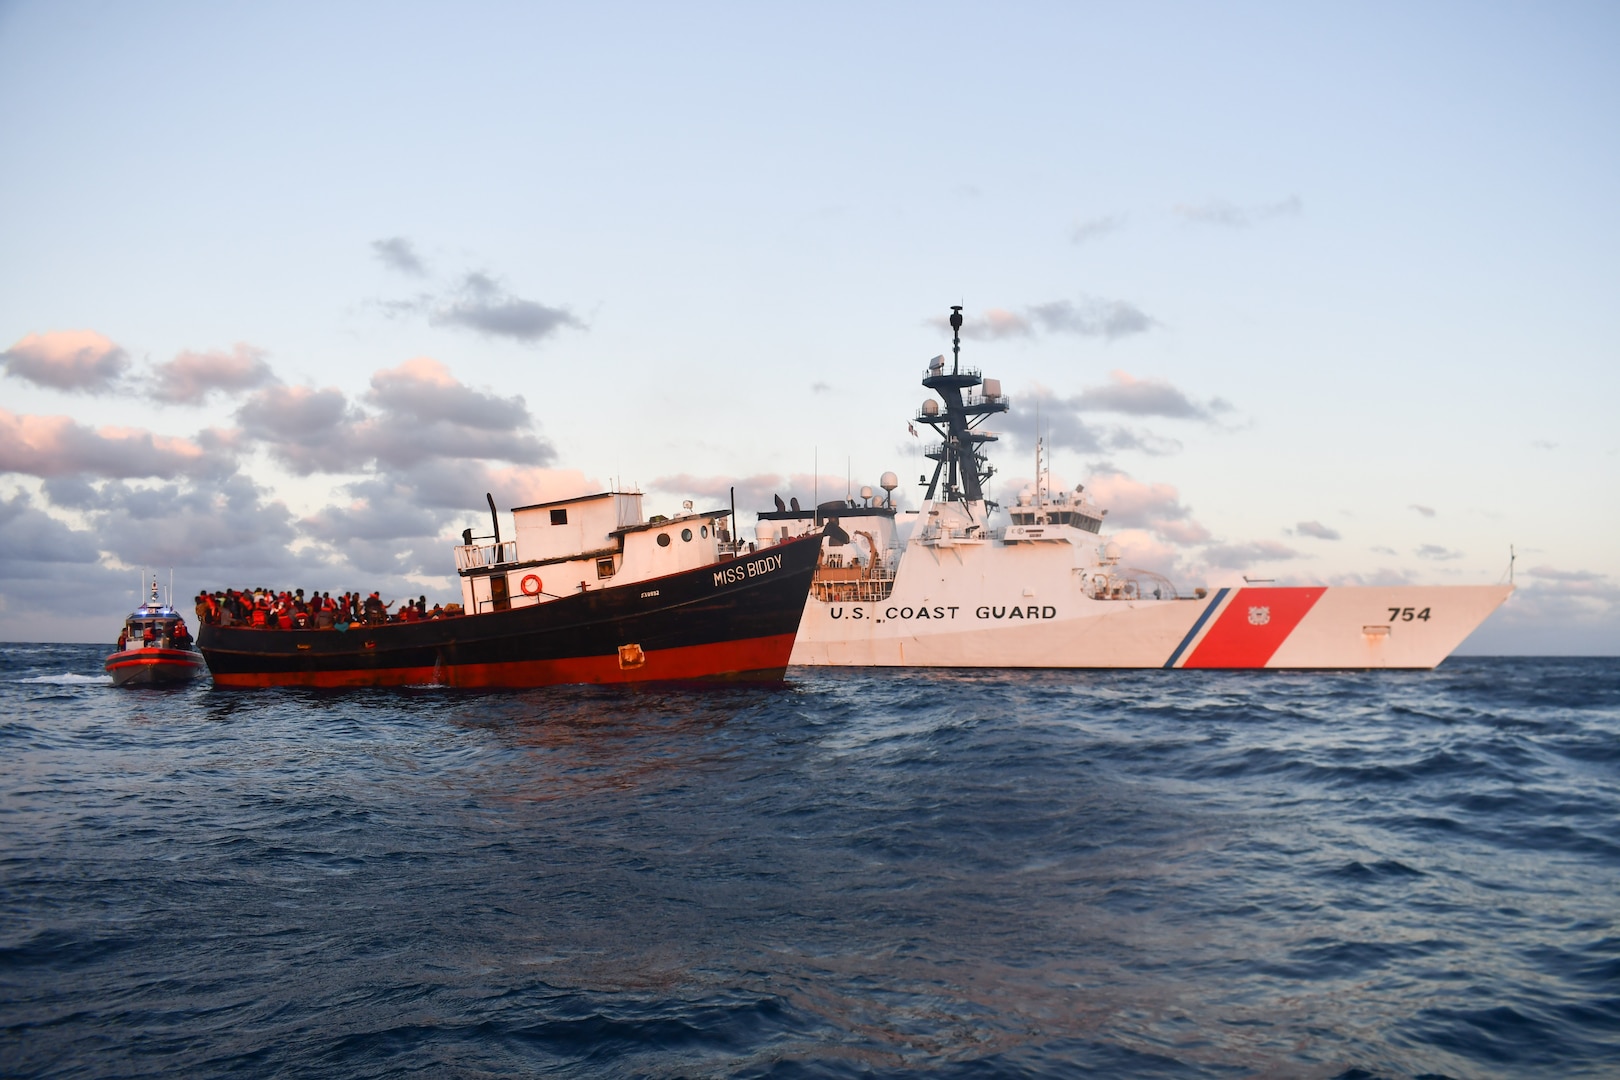 Coast Guard Cutter Isaac Mayo stopped the illegal voyage of an overloaded 80-foot motor vessel, 30 miles northeast of Caibarien, Cuba, Feb.15, 2023. There were over 300 people aboard the Haitian-suspected, migrant voyage vessel. (U.S. Coast Guard photo by Lt. Alexander Cordes)